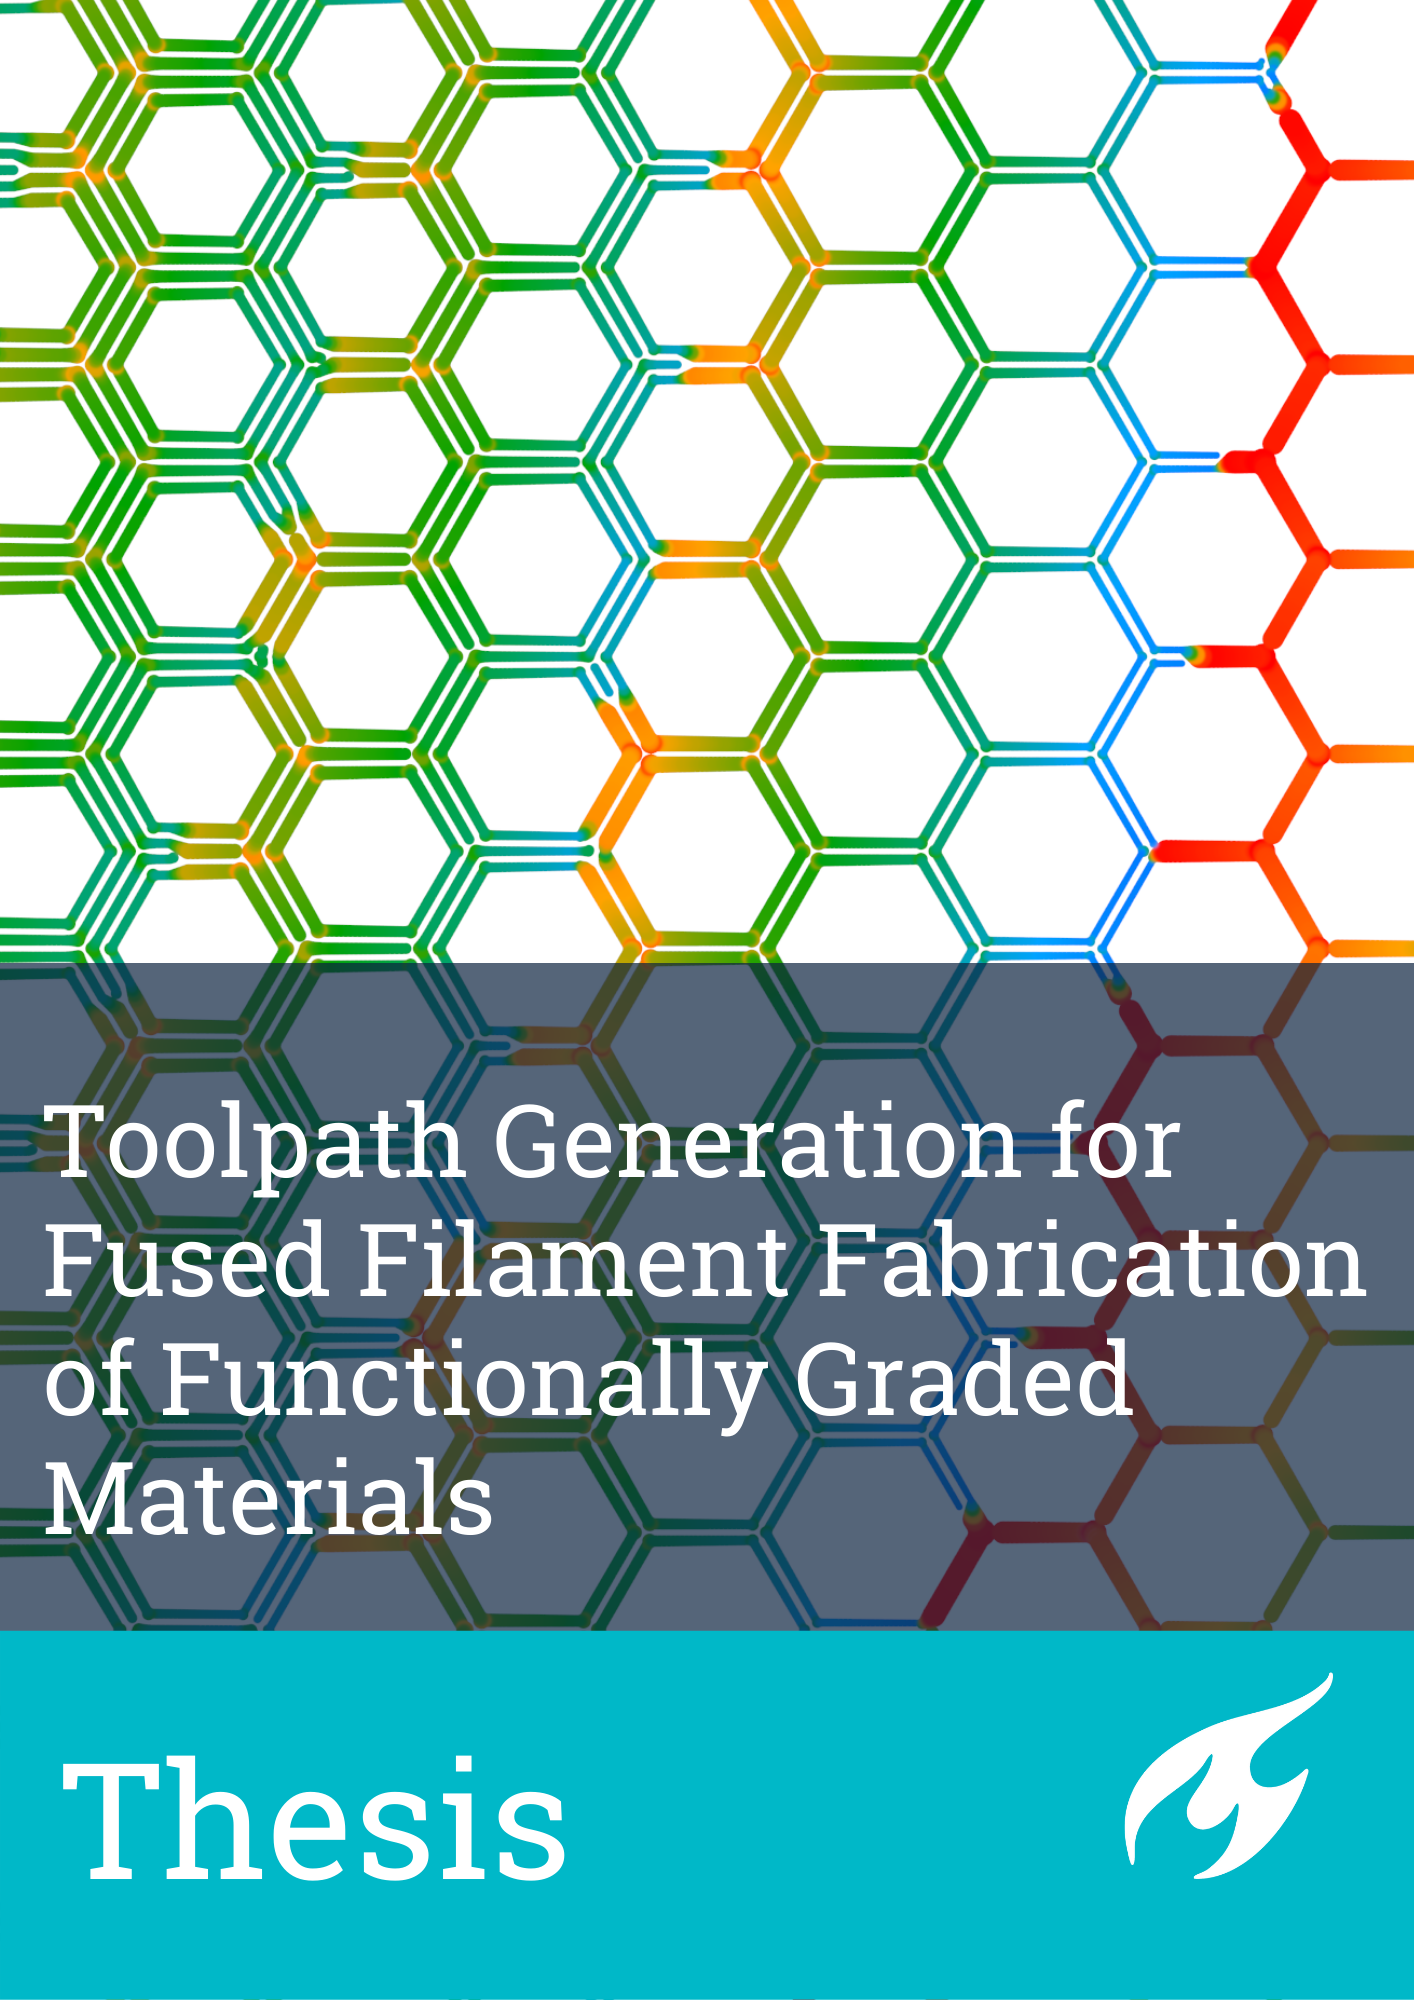 Thesis, titled "Toolpath Generation for Fused Filament Fabrication of Functionally Graded Materials"